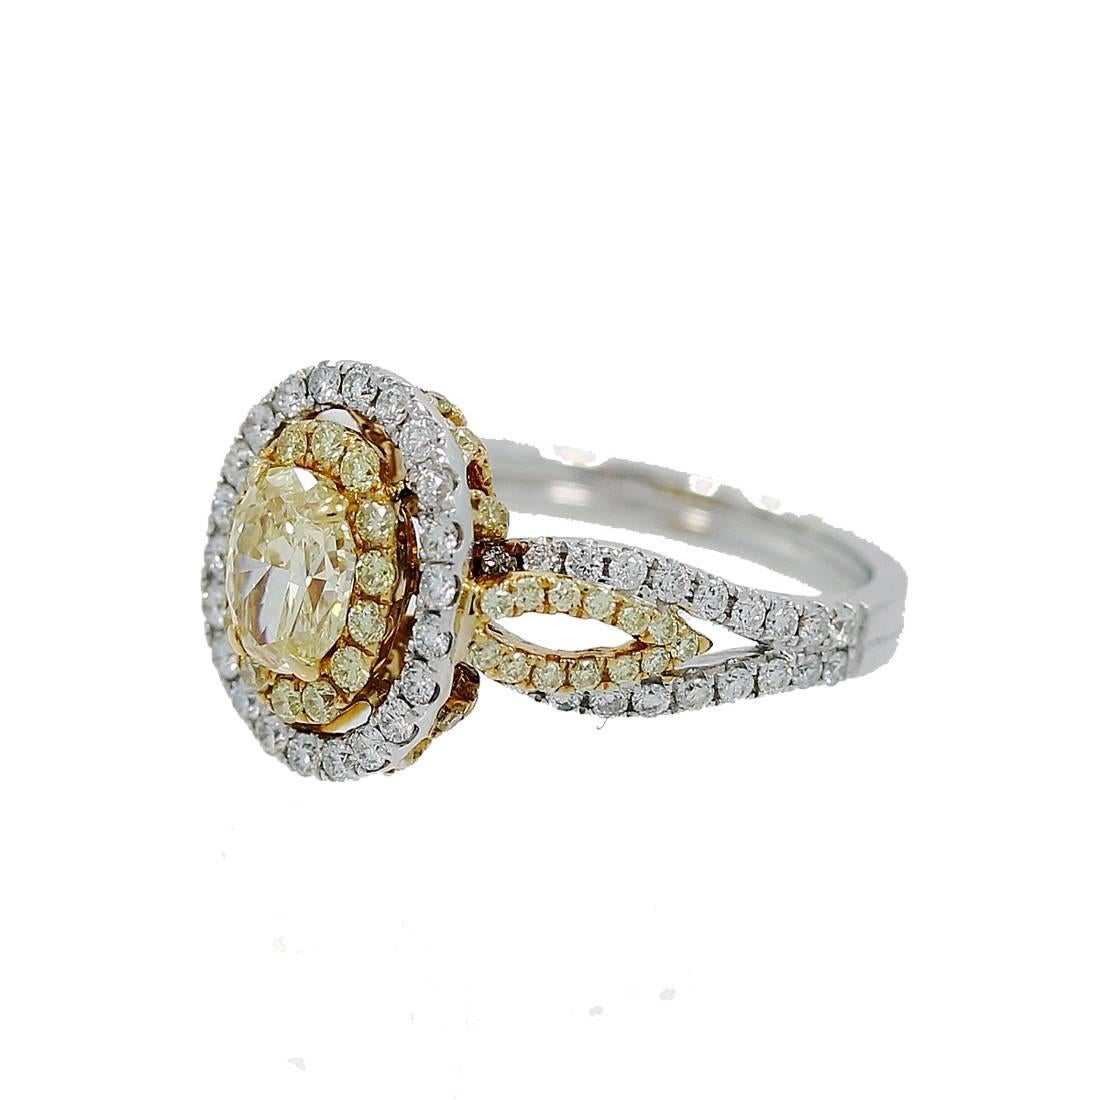 18K Yellow and White Gold Engagement Ring with a Center Oval Fancy Intense Yellow Diamond which weighs .80 carats and Round Brilliant Yellow and White Diamonds with a total of 1.31 carats. The Center Diamond has a EGLUS report #68695802. The ring is